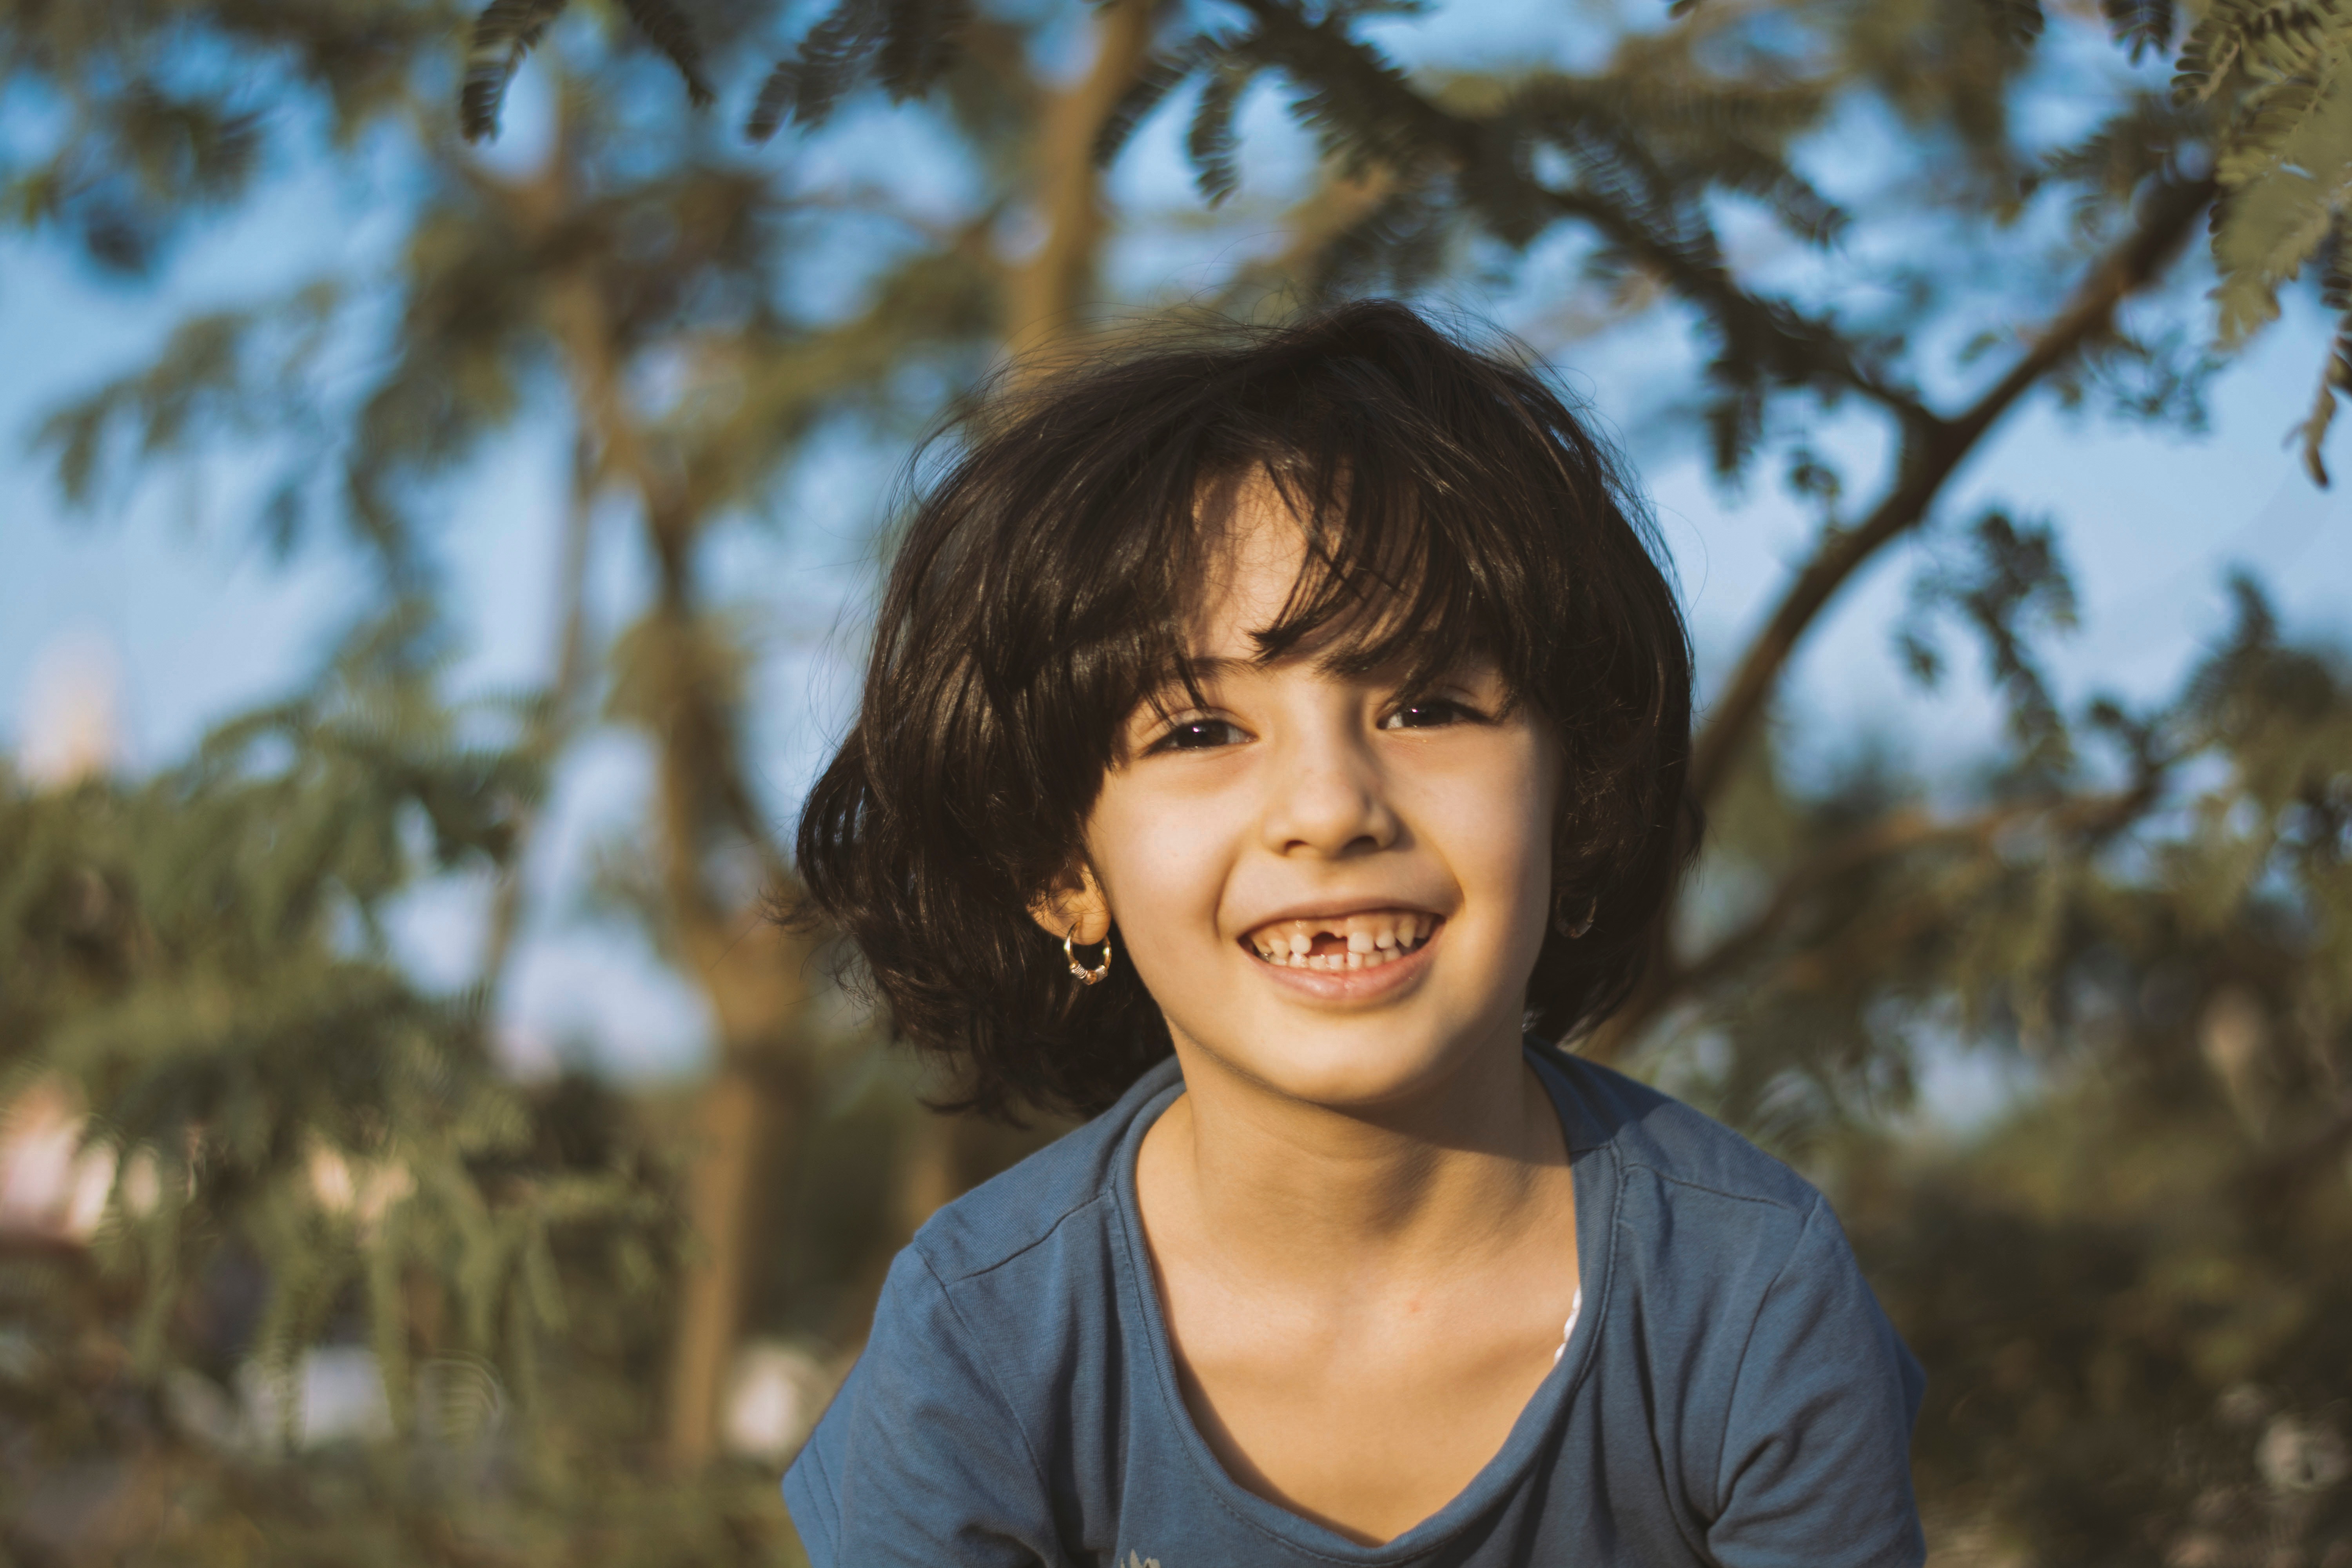 Shallow Focus Photography of Girl Wearing Blue Shirt, Adorable, Innocence, Wear, Trees, HQ Photo